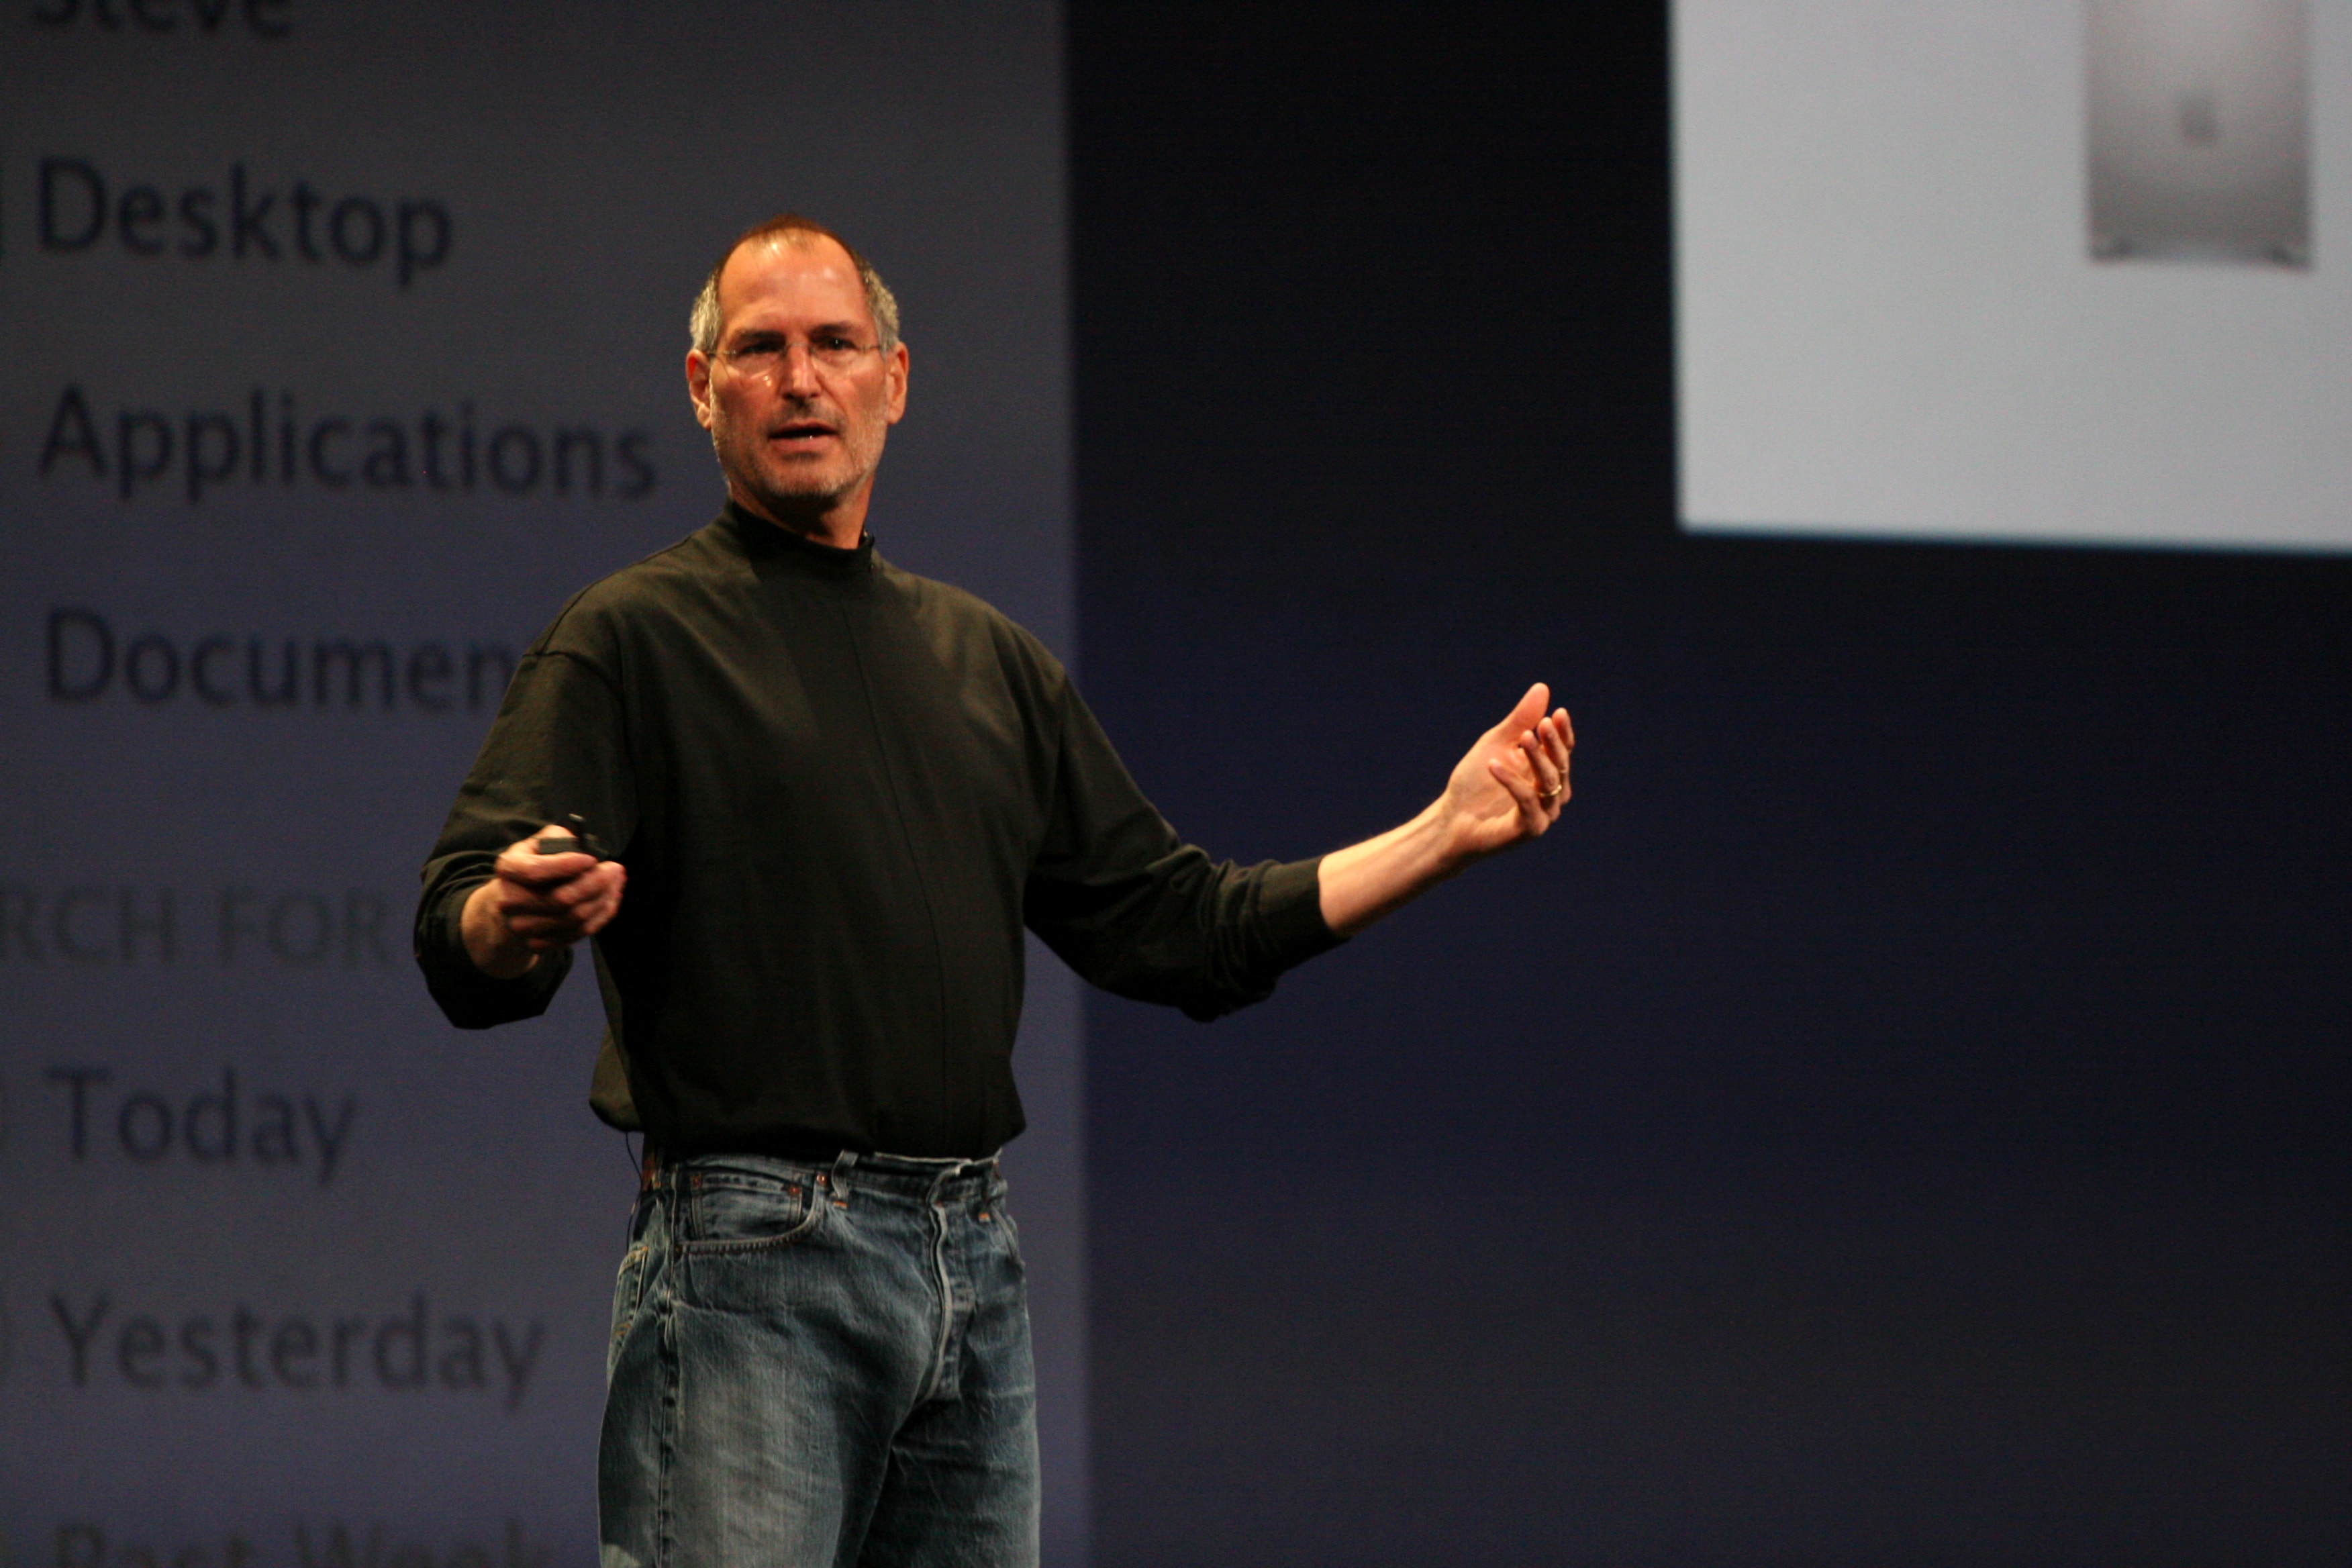 Steve Jobs used this psychological trick all the time to get us to accept Apple's high prices.